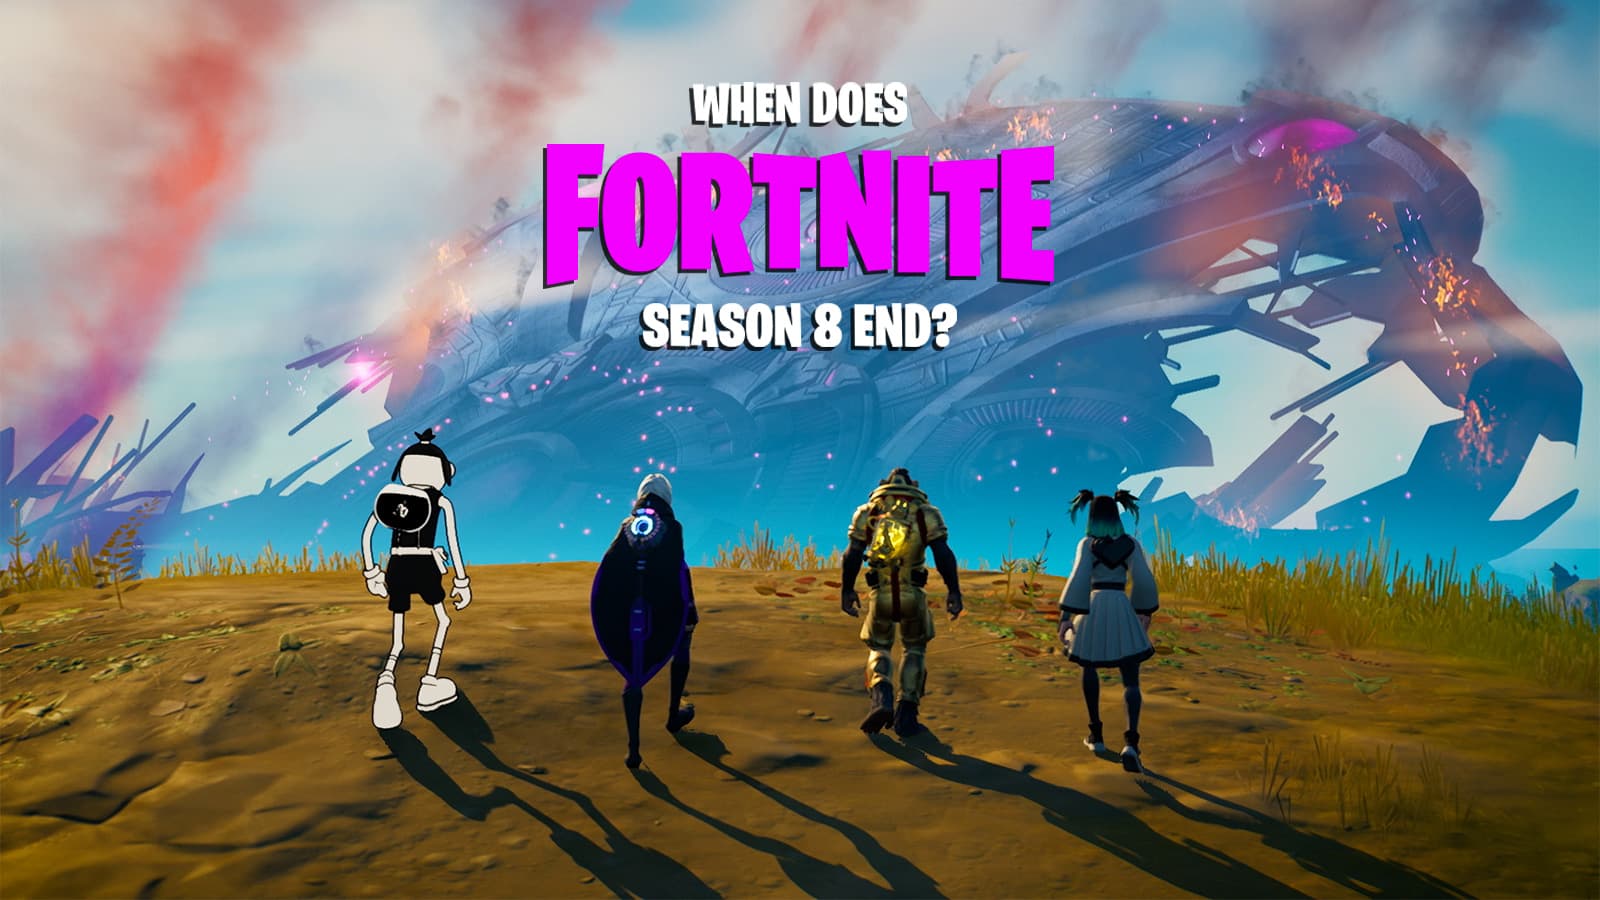 When does Forntite Season 8 end